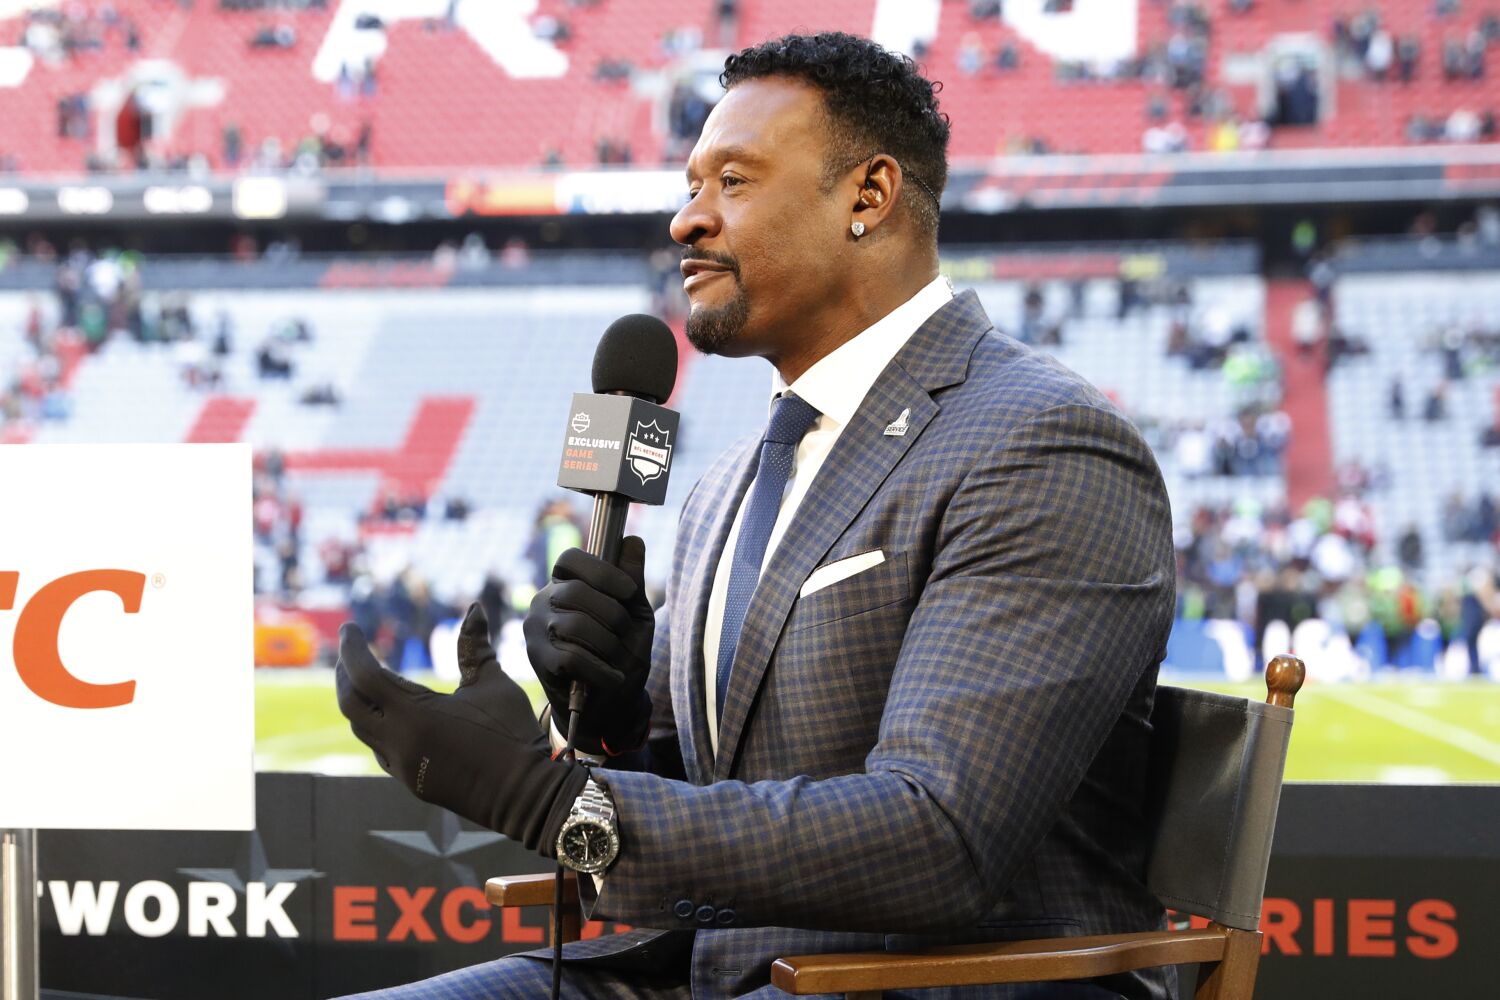 Former NFL star Willie McGinest arrested in L.A. on assault charge